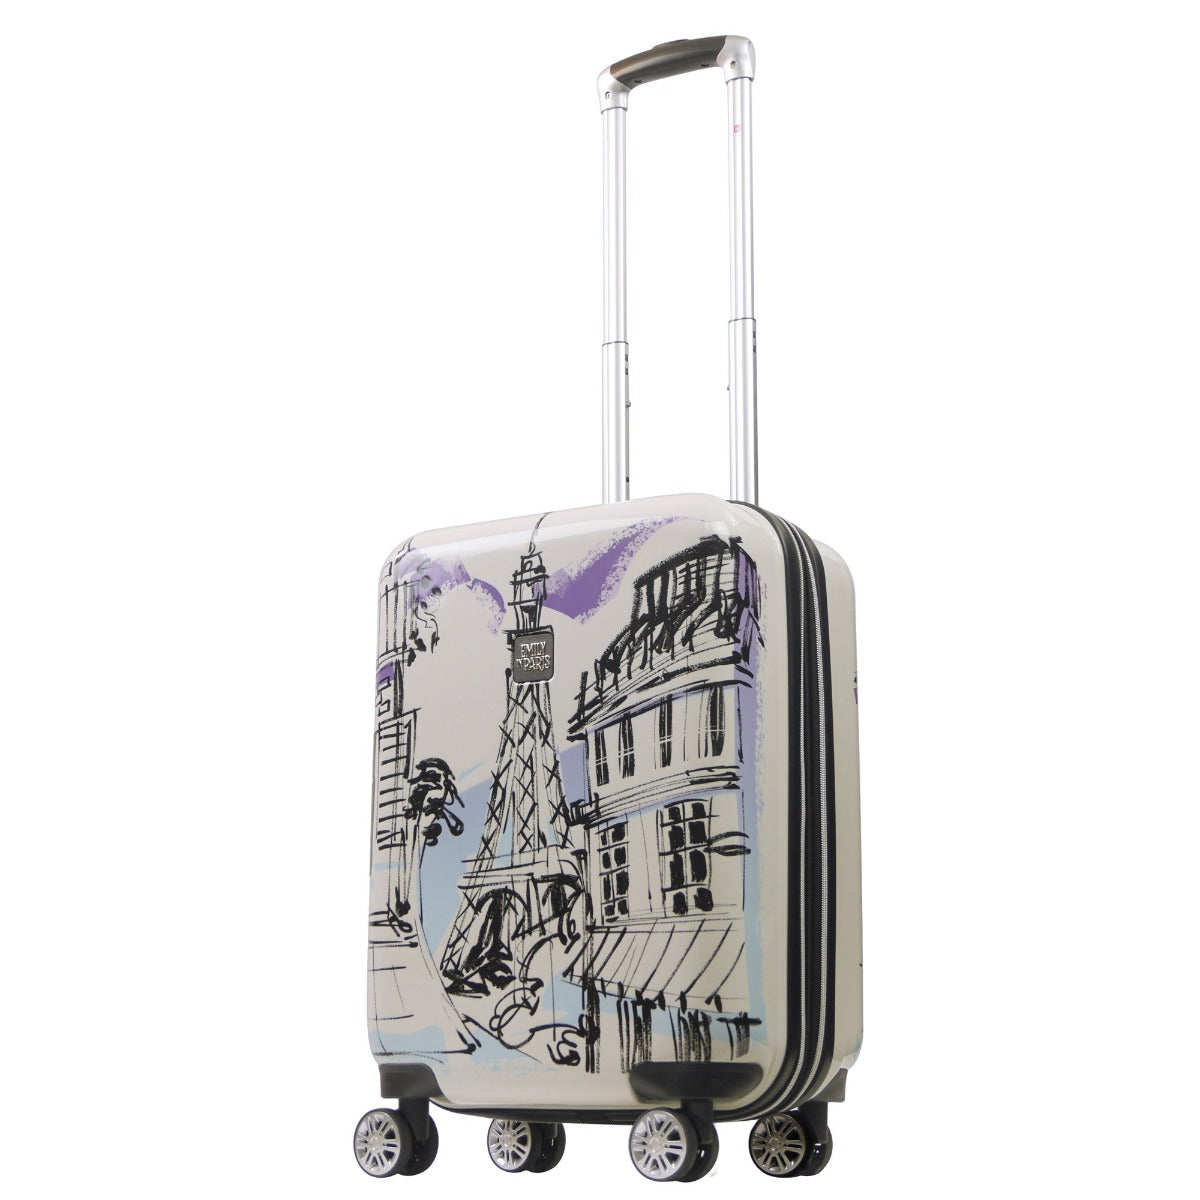 Ful Emily in Paris 21 inch hardside expandable suitcase - best carry on rolling luggage